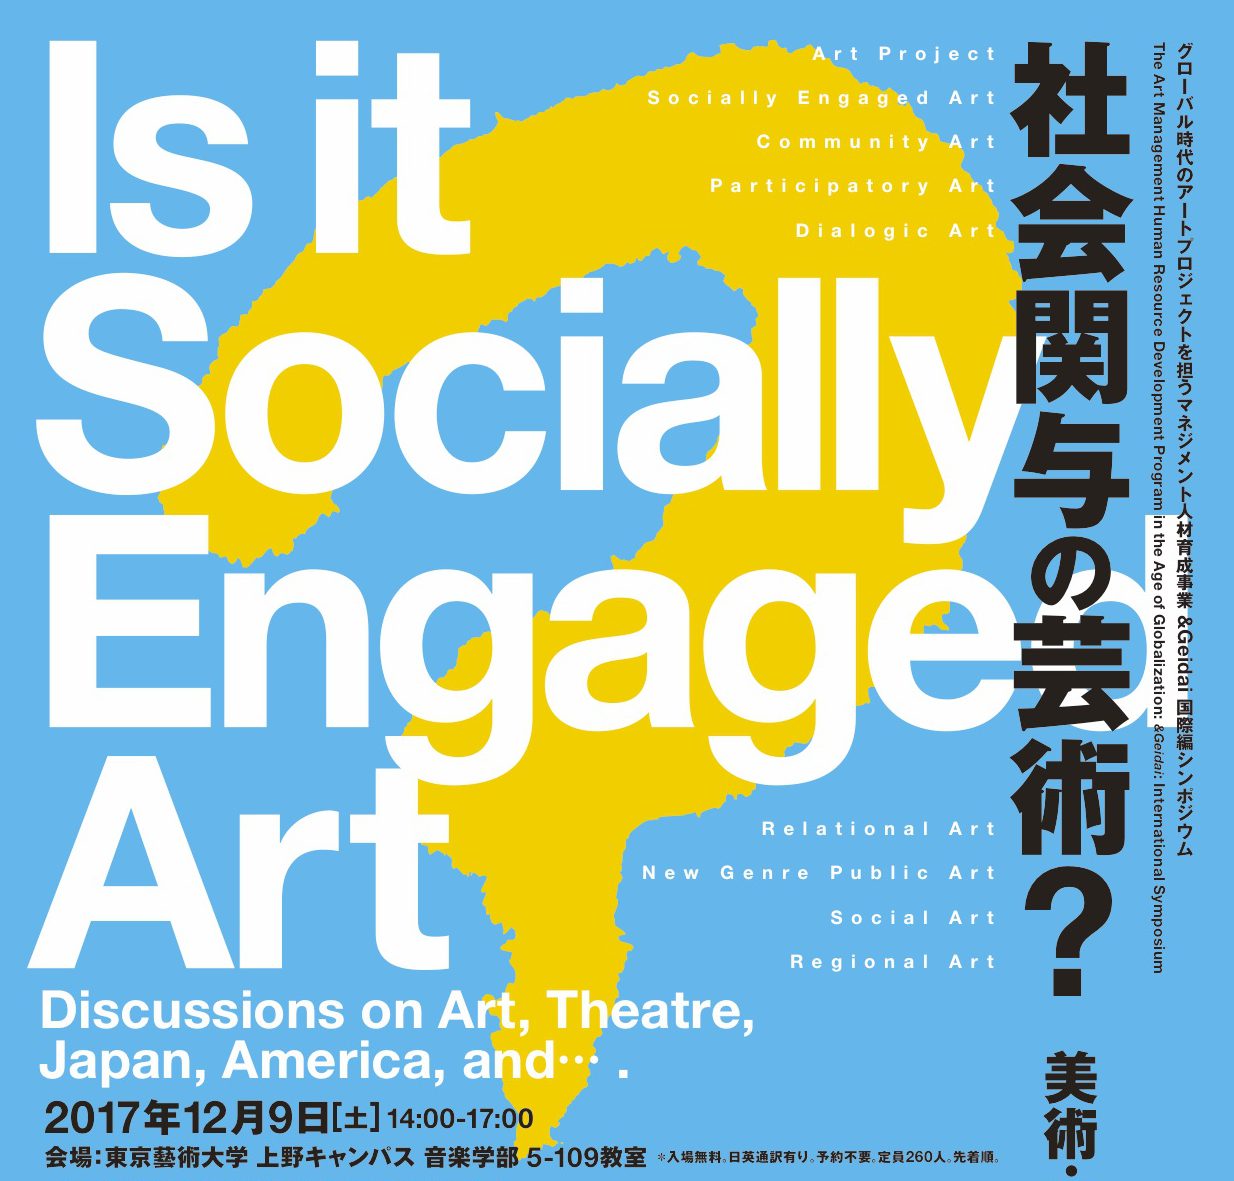 &Geidai: International Symposium  Is It Socially-Engaged Art?  Discussions On Art, Theatre, Japan, America, And….